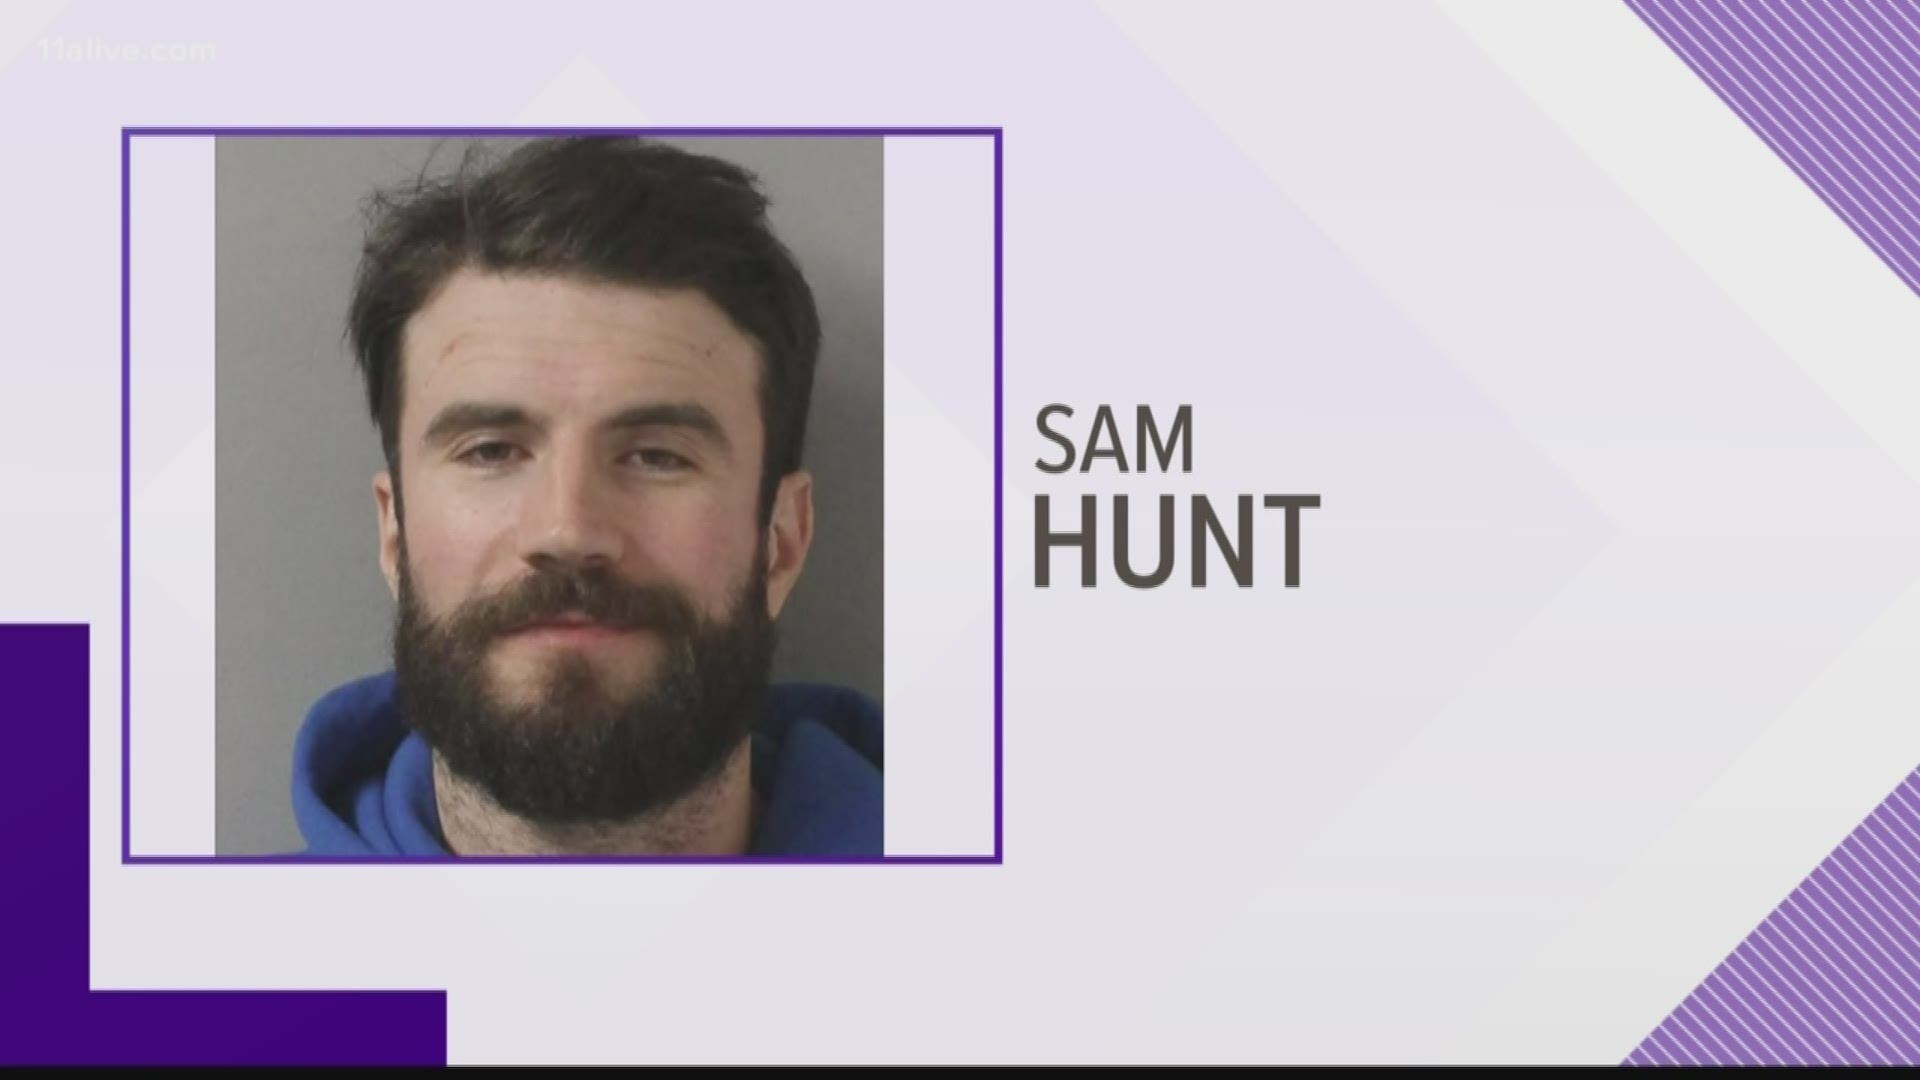 Police say they pulled over country singer Sam Hunt for driving the wrong way down a one-way road in Nashville.